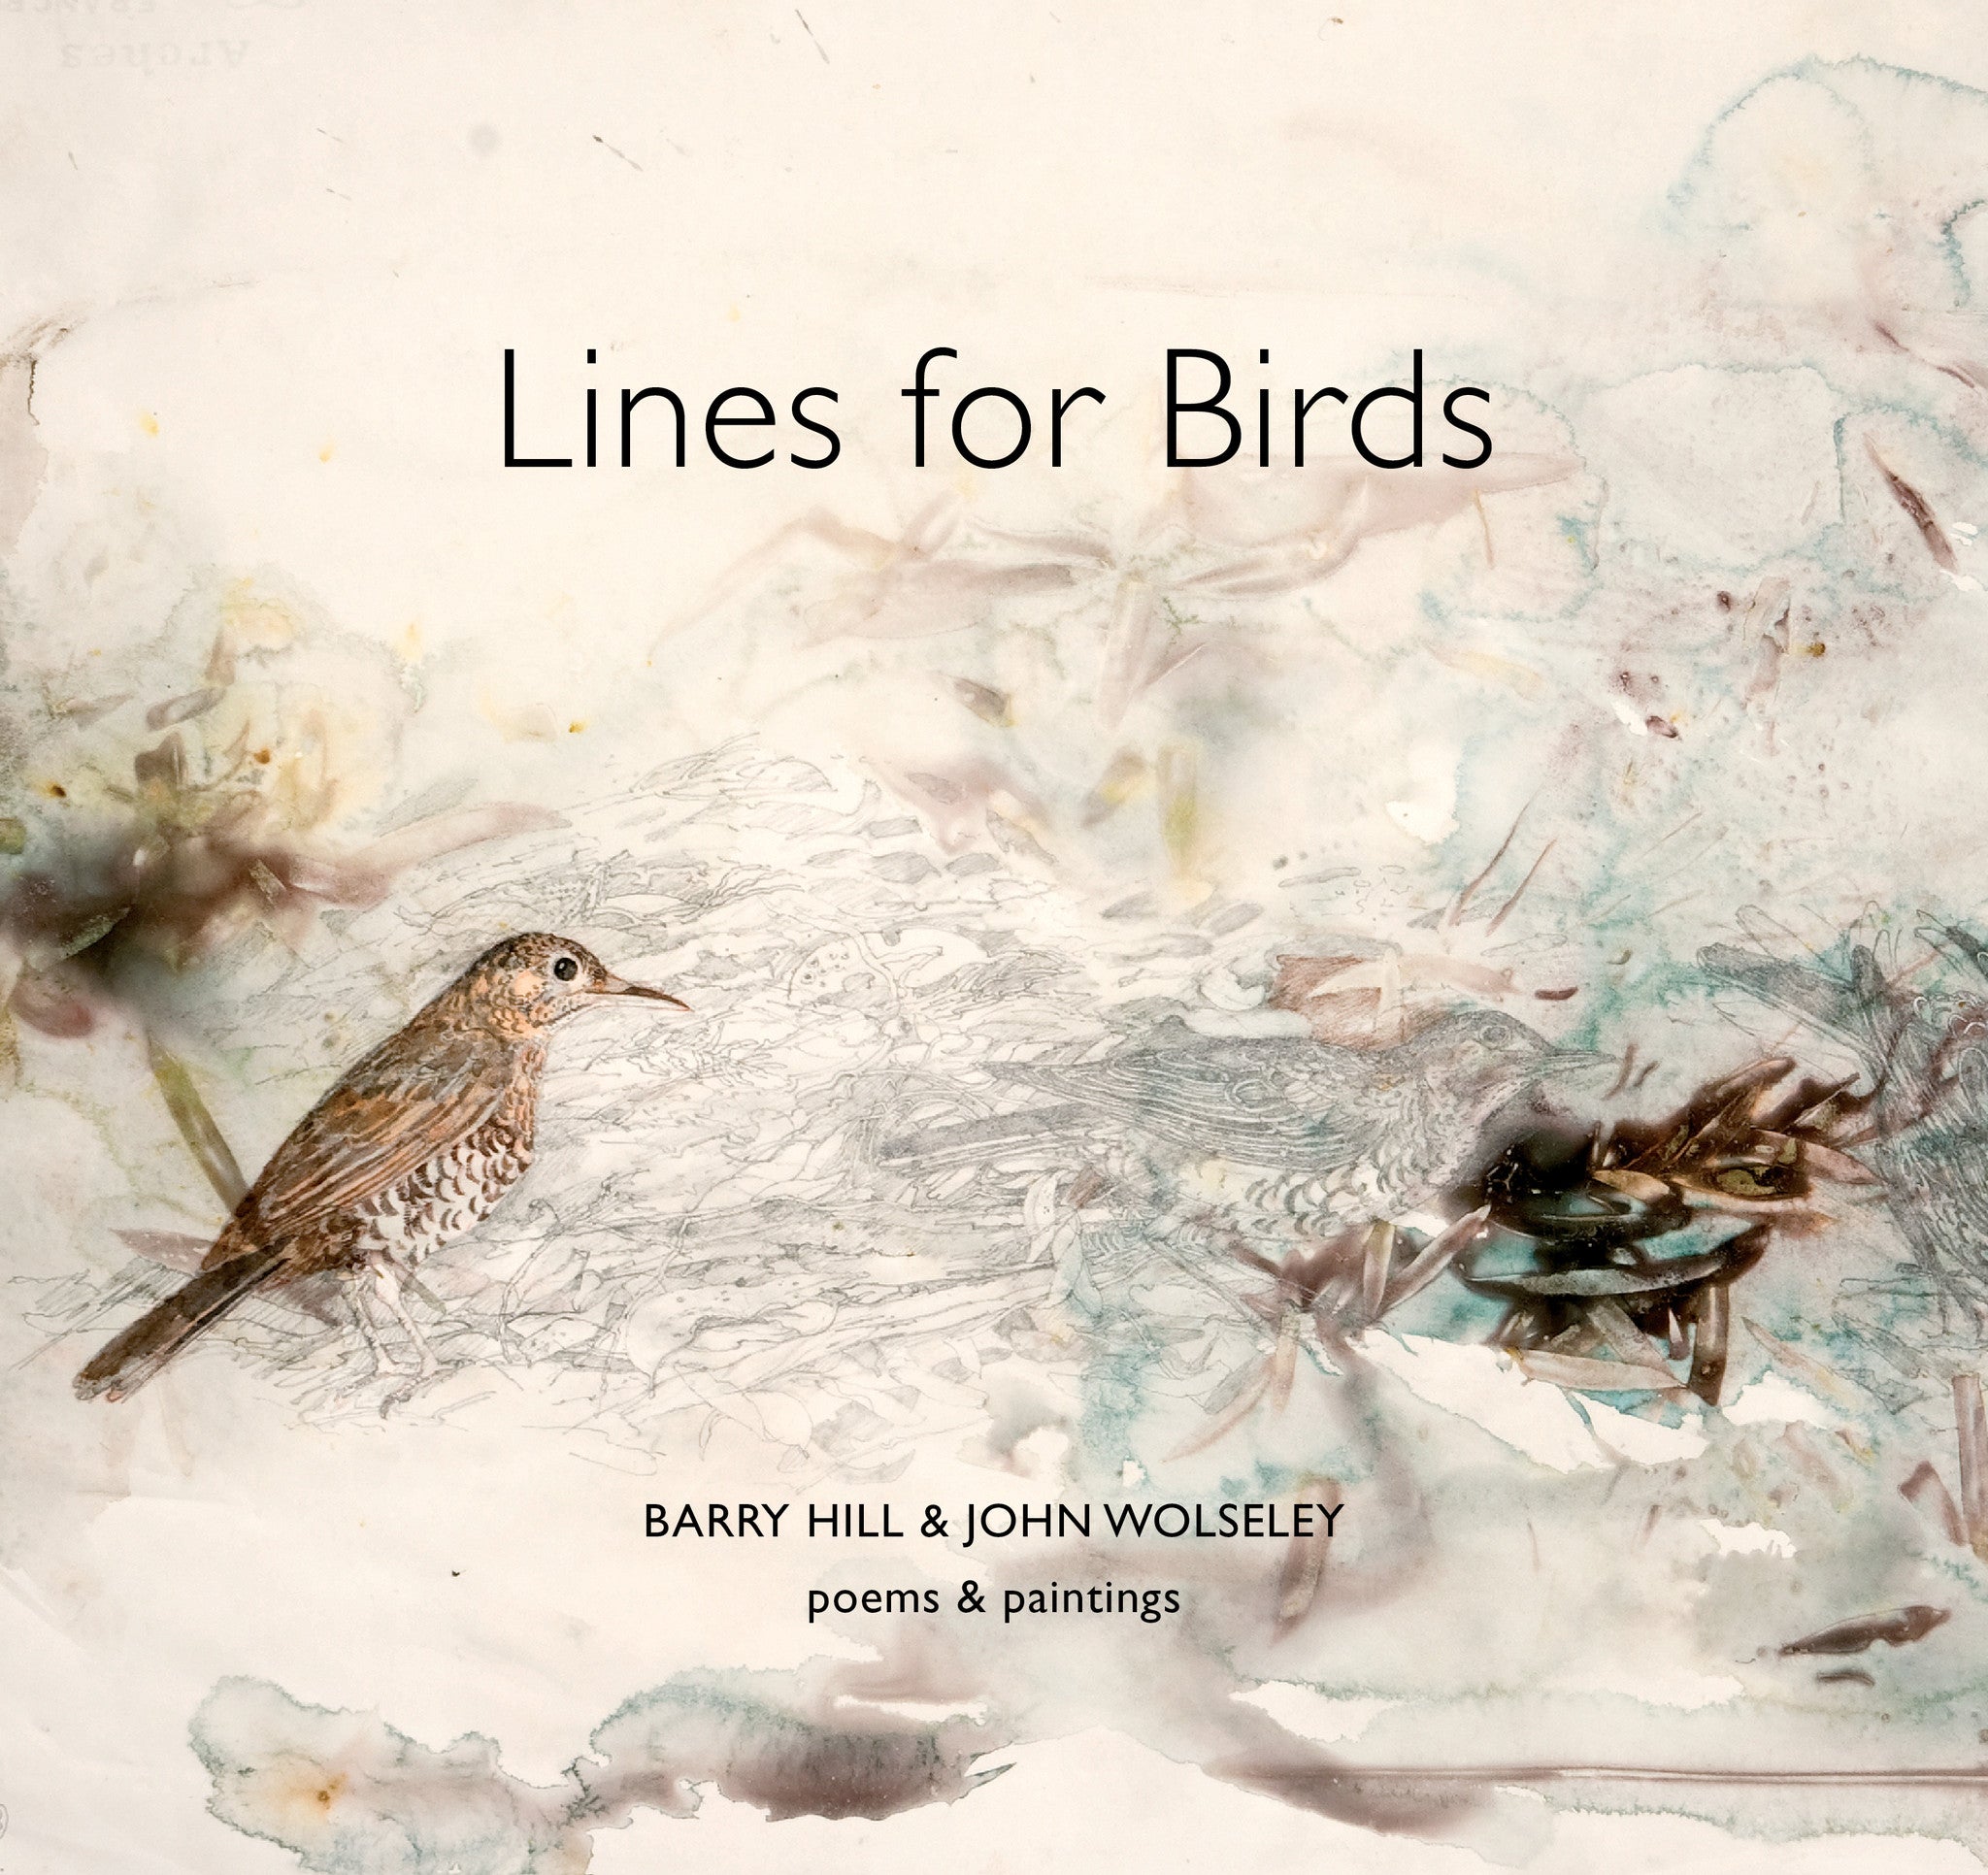 Lines for Birds: Poems & Paintings